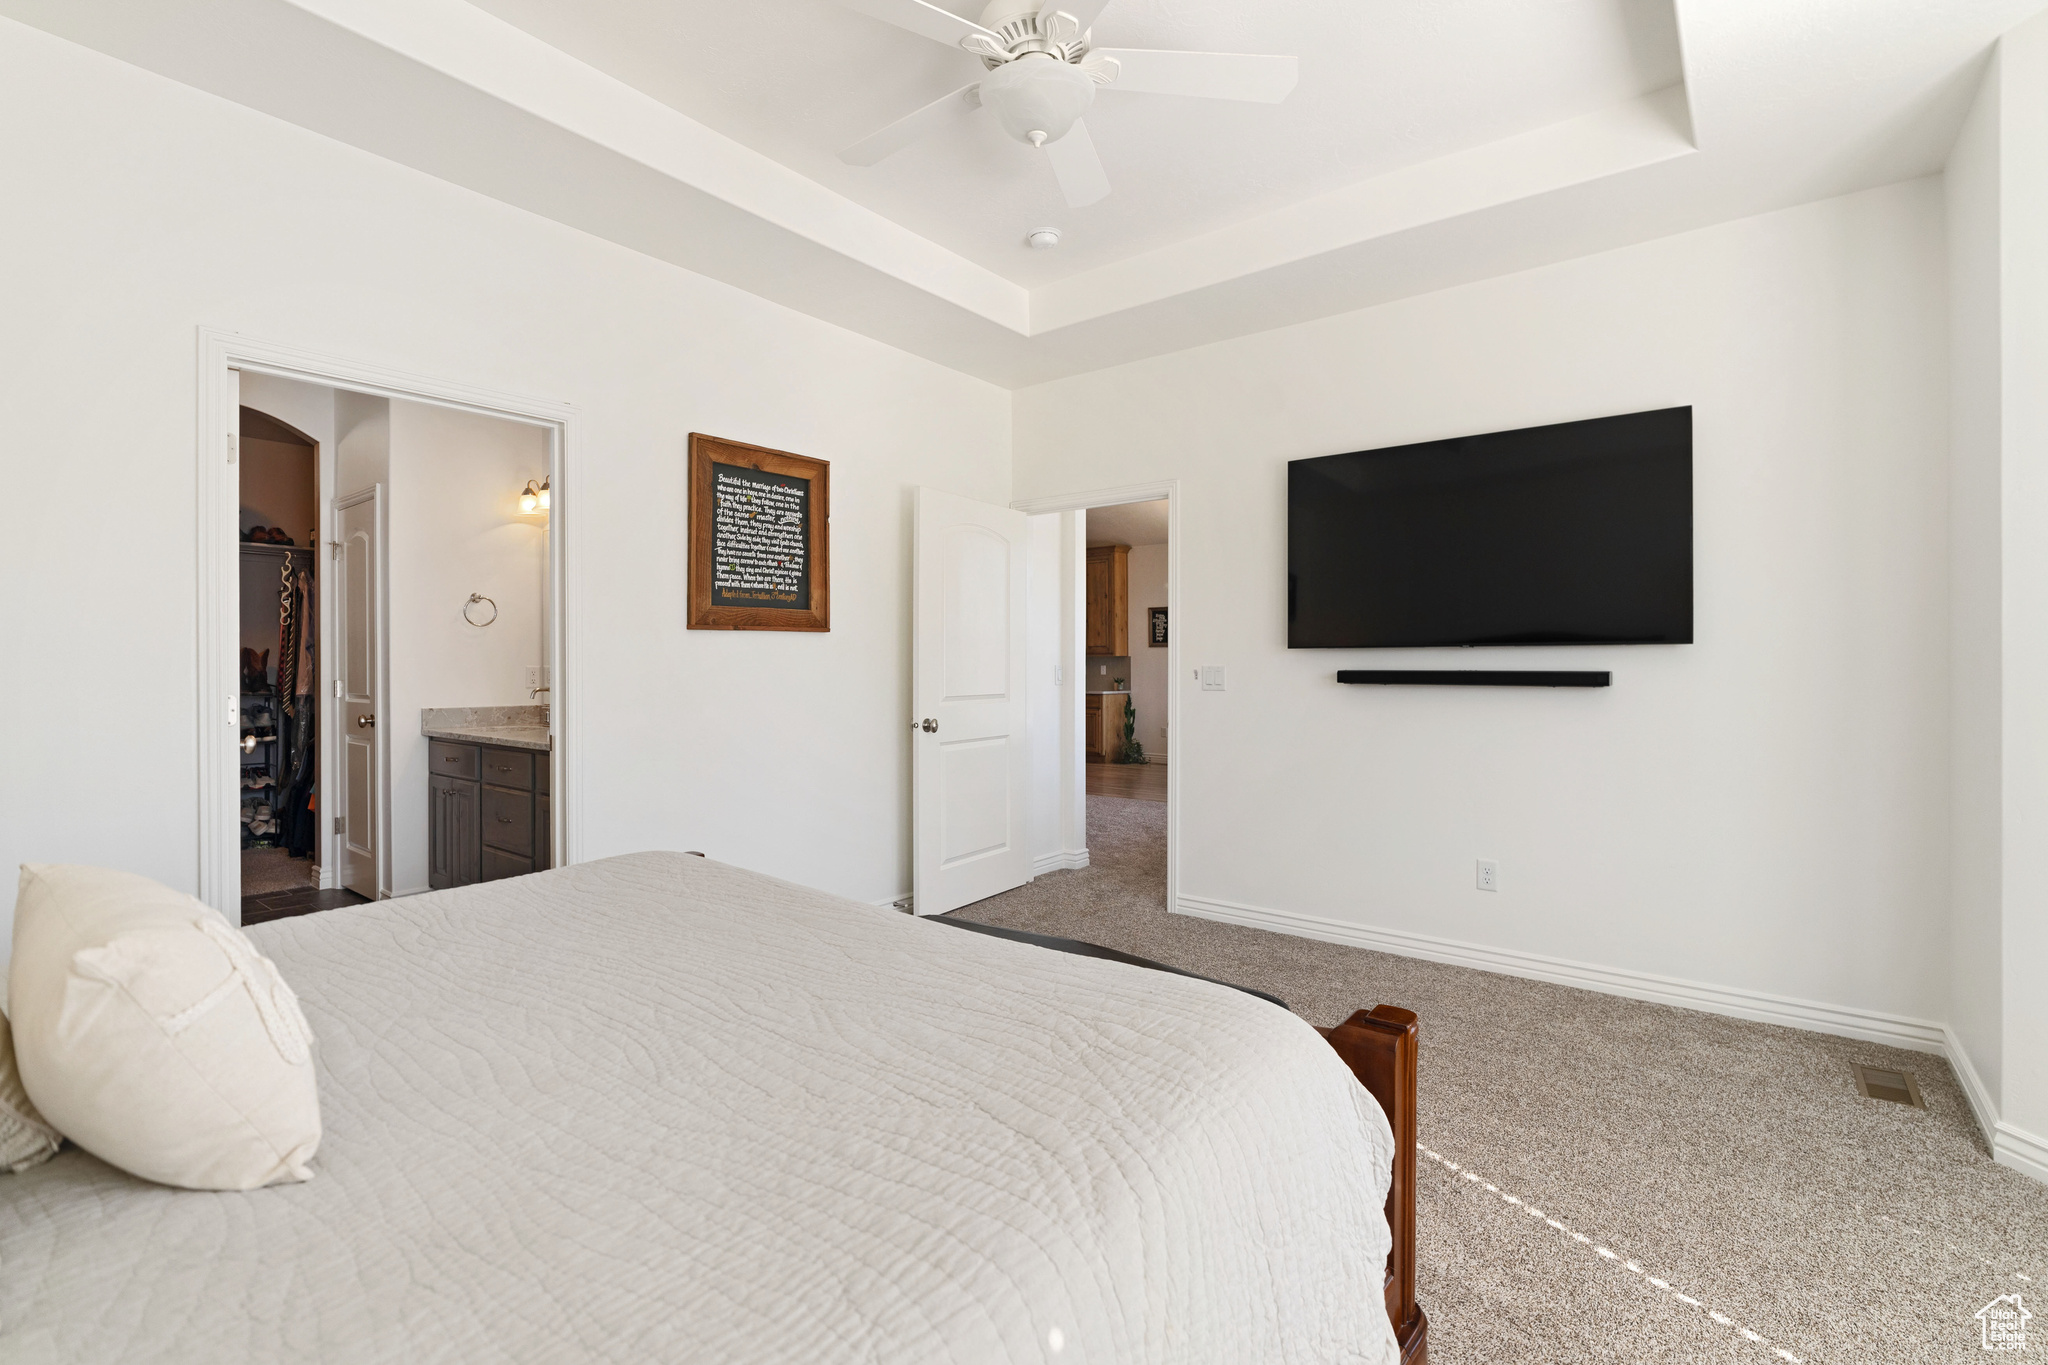 Carpeted bedroom featuring ceiling fan, ensuite bath, and a tray ceiling